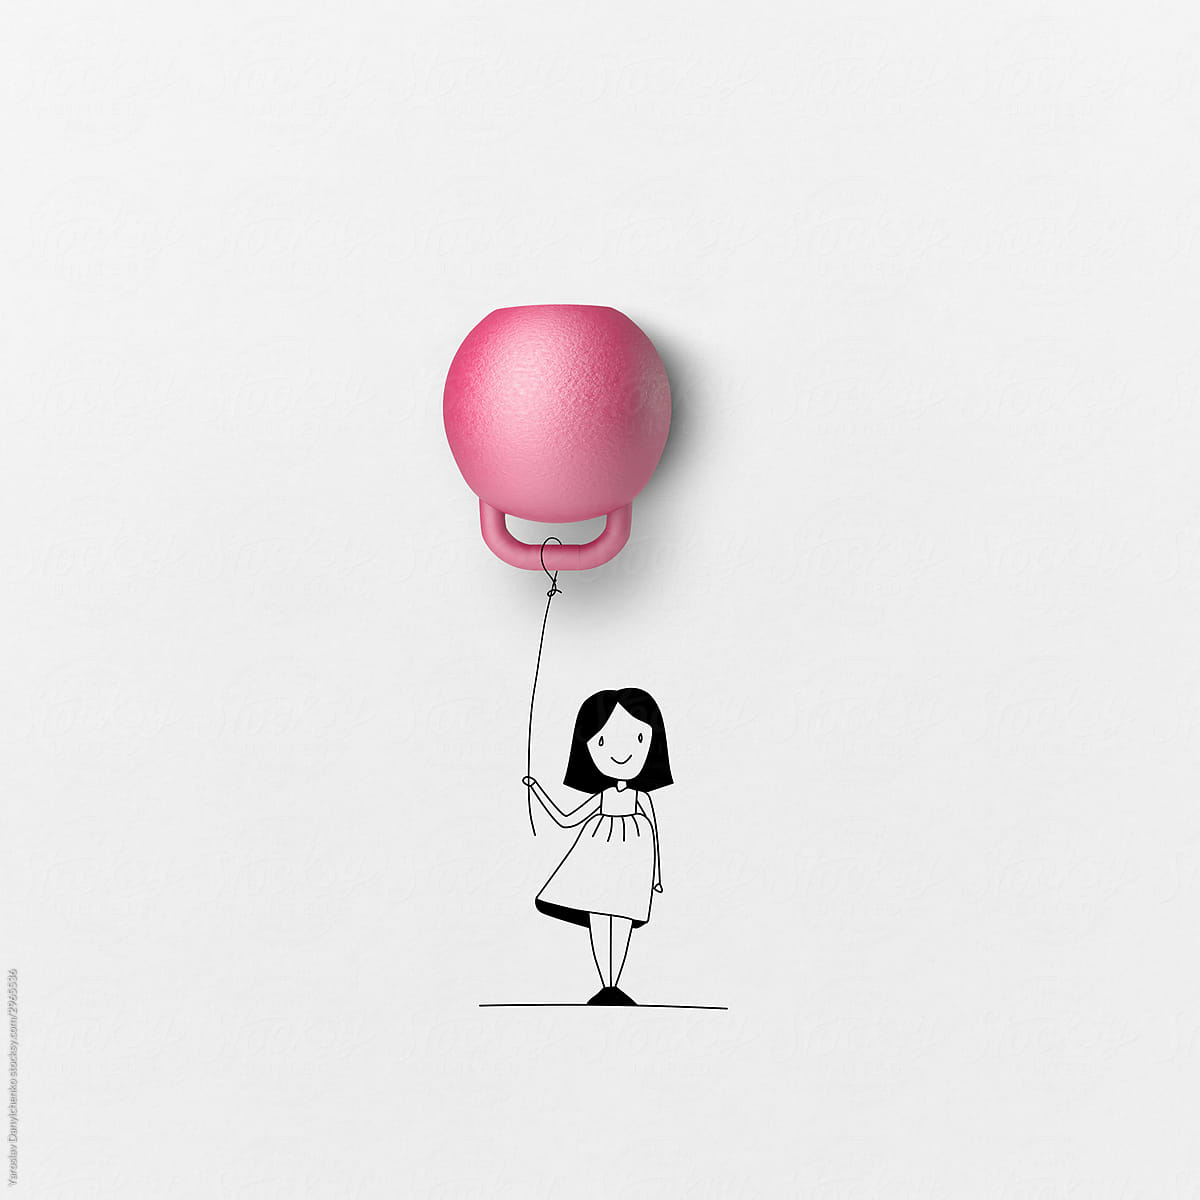 Girl with pink kettle bell balloon.